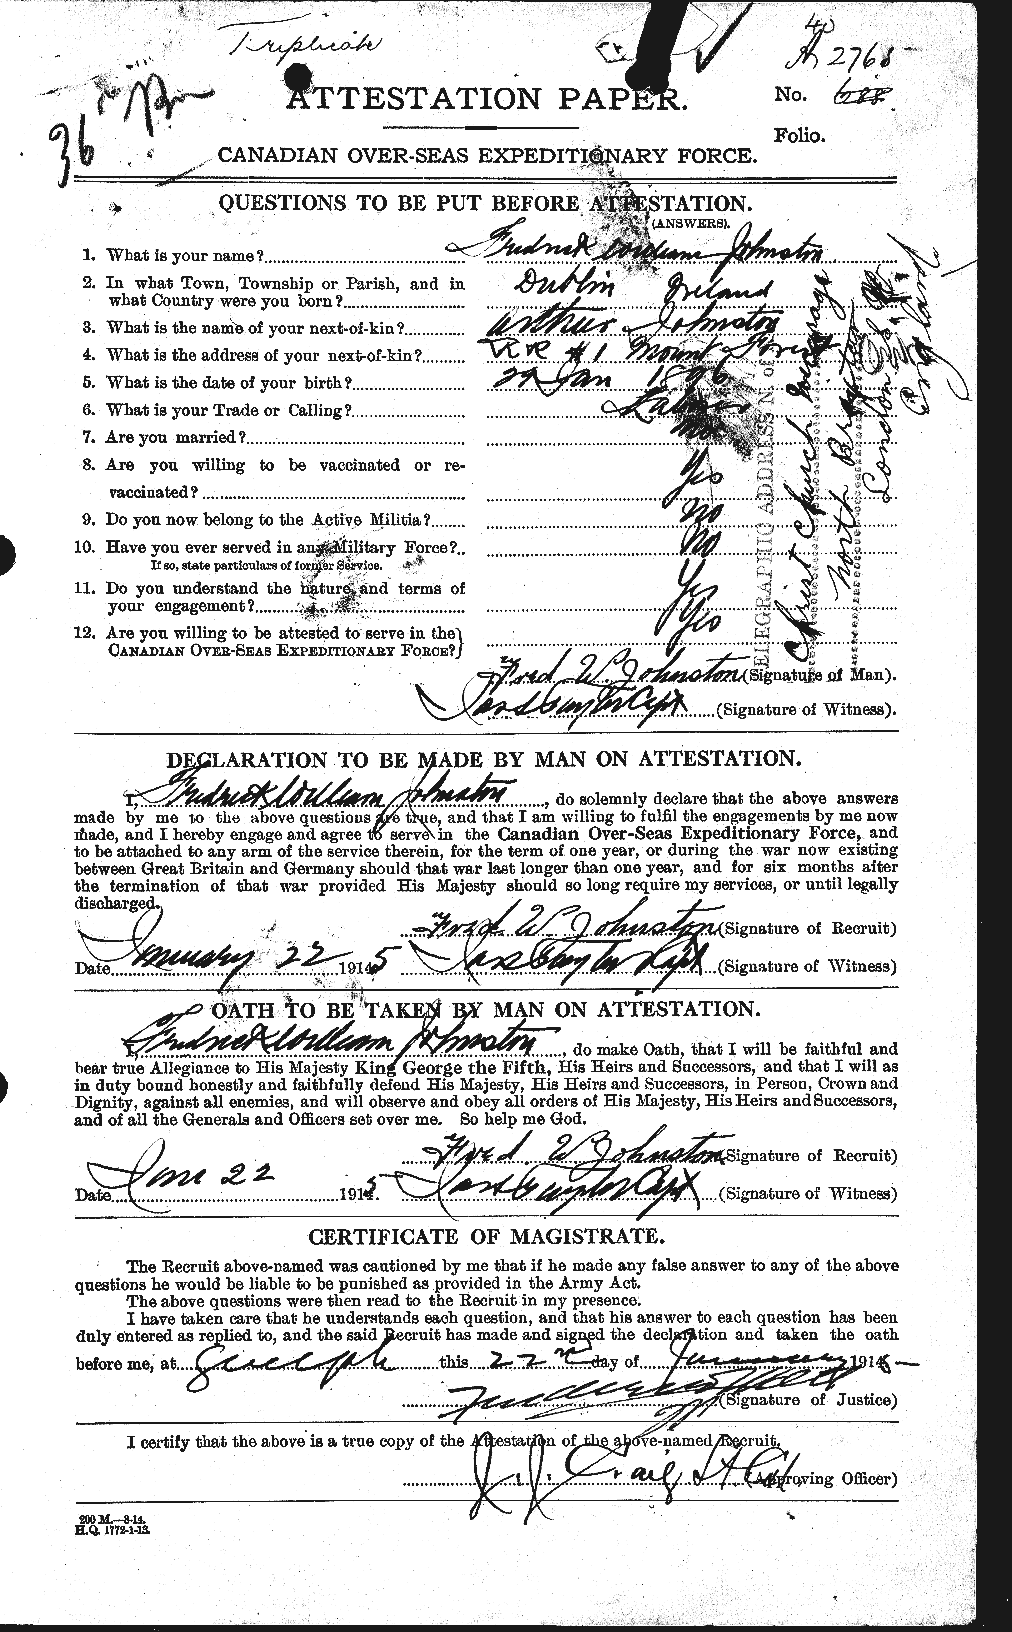 Personnel Records of the First World War - CEF 423308a